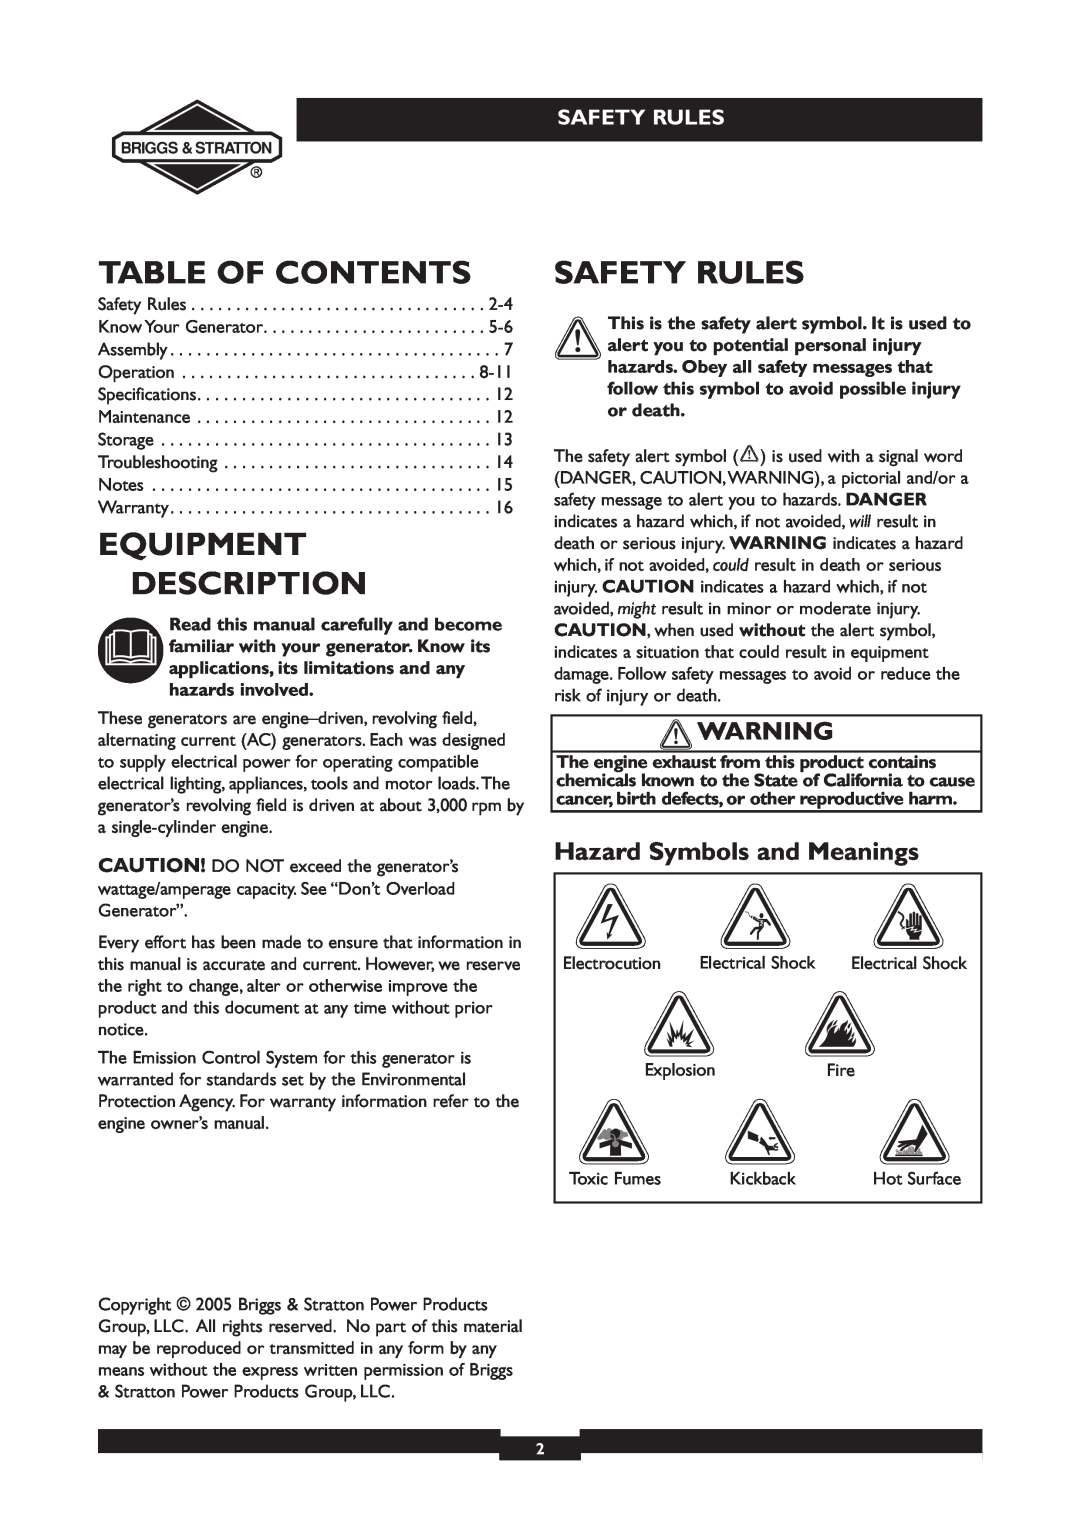 Briggs & Stratton 030213, 030212 Table Of Contents, Equipment Description, Safety Rules, Hazard Symbols and Meanings 